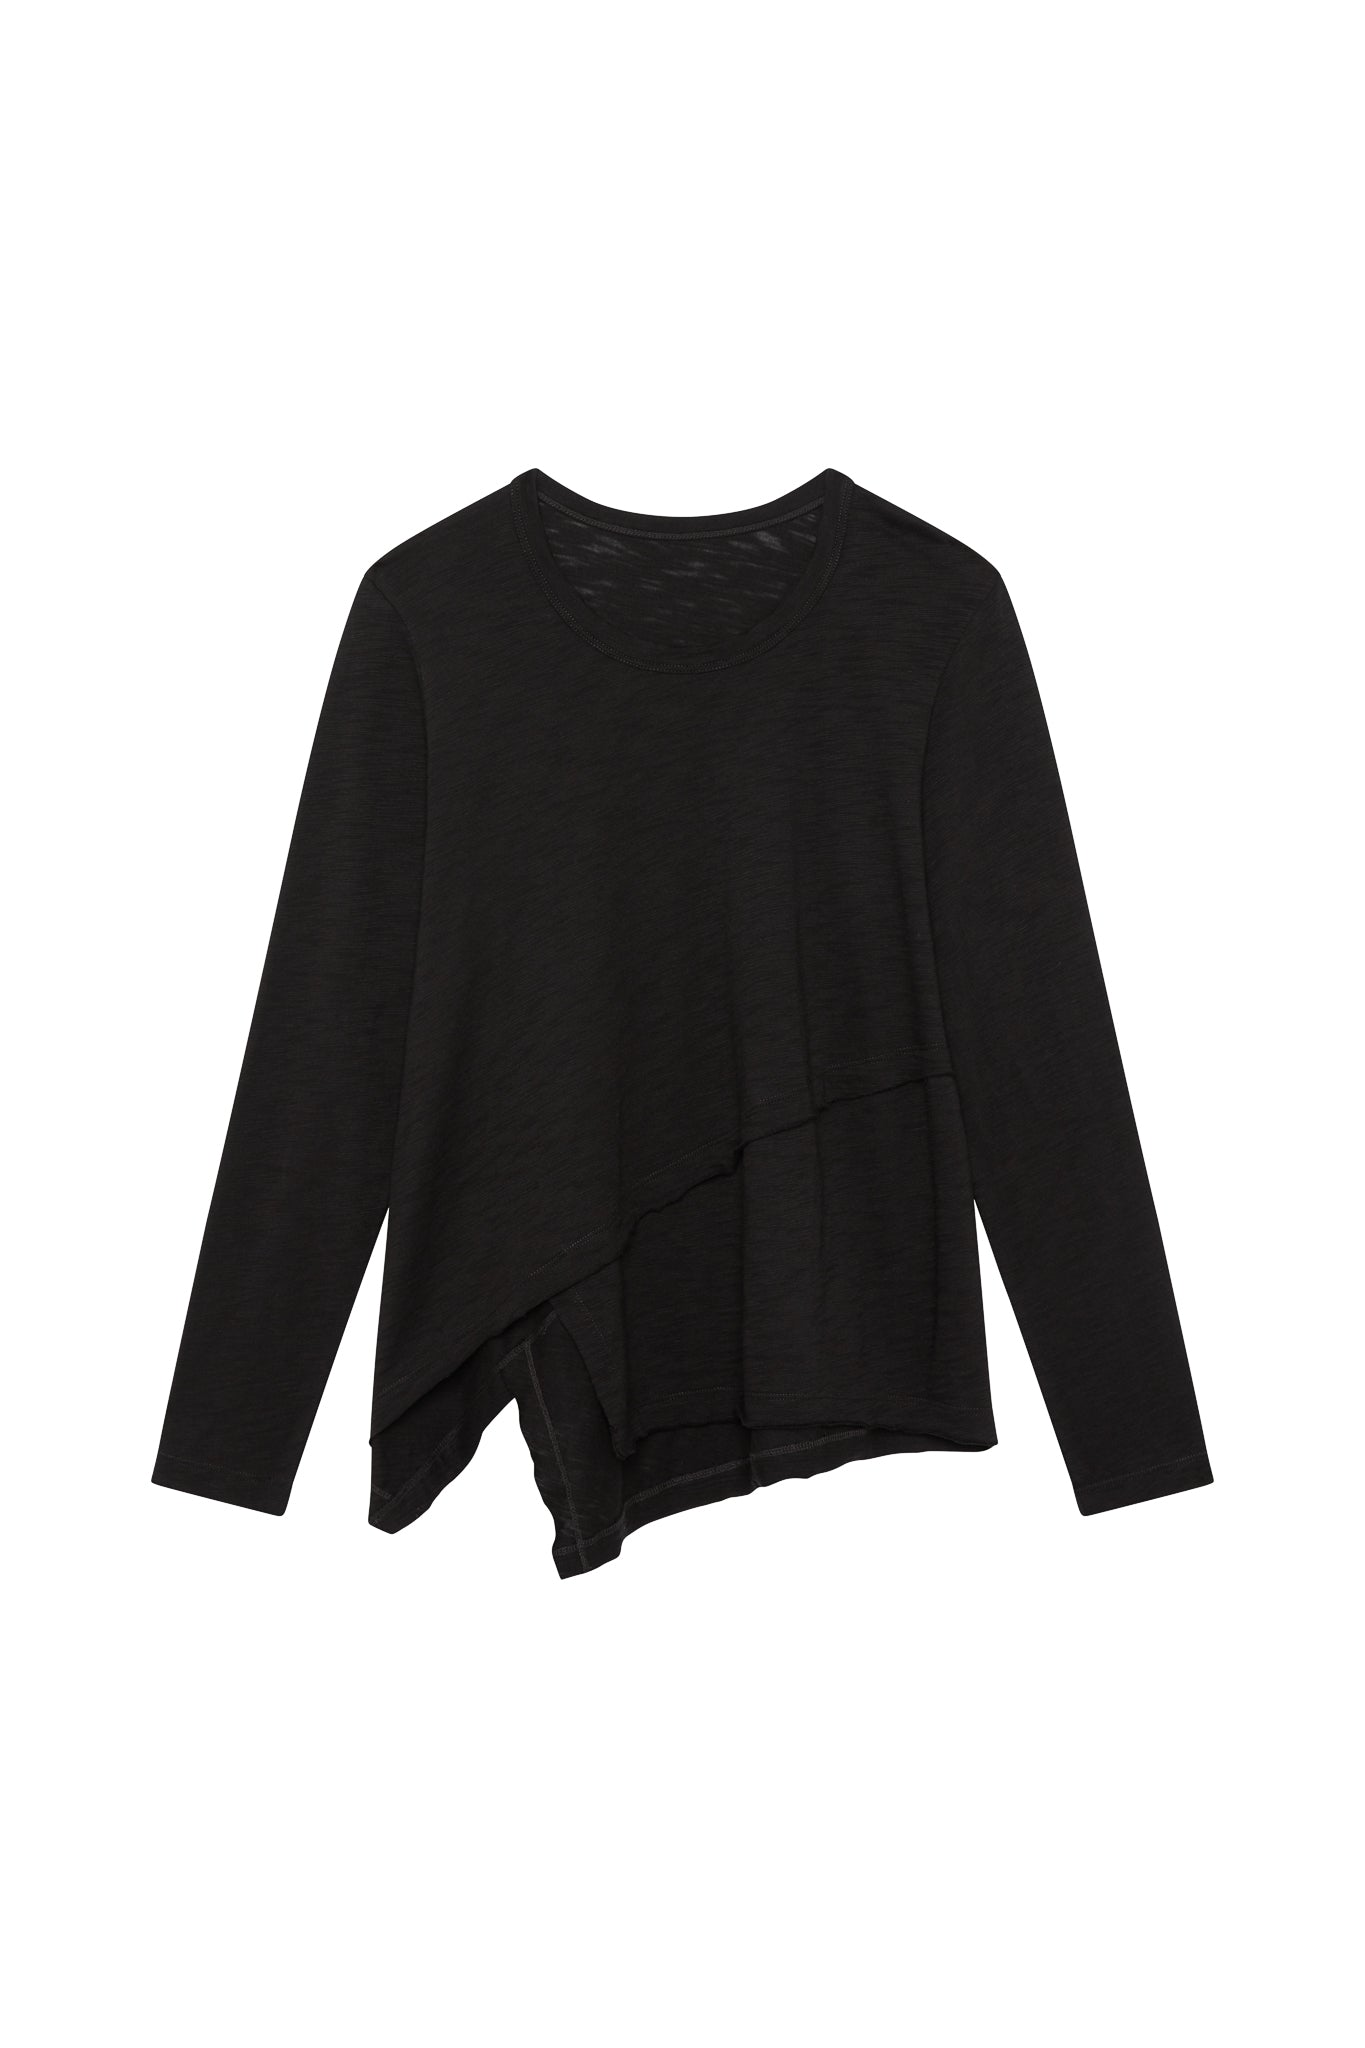 Shop Round Neck Inner with Long Sleeves Online